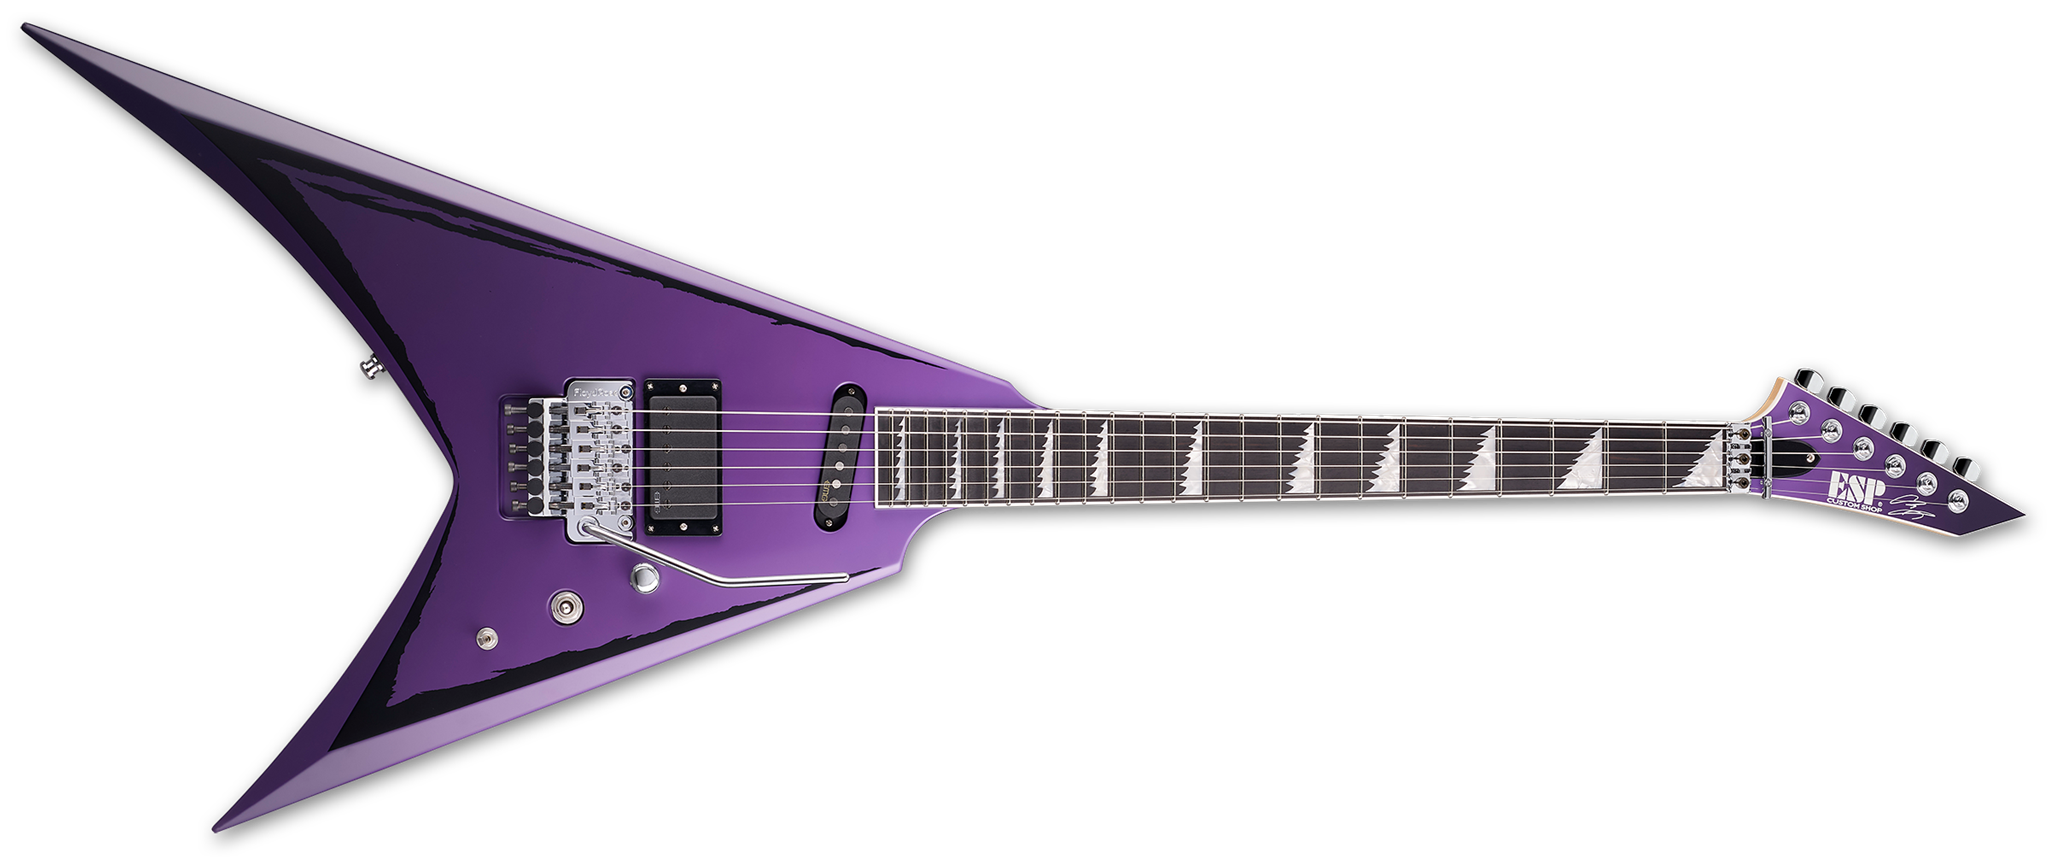 ESP Alexi Ripped Purple Fade Satin w/Ripped Pinstripes 6-String Electric Guitar   